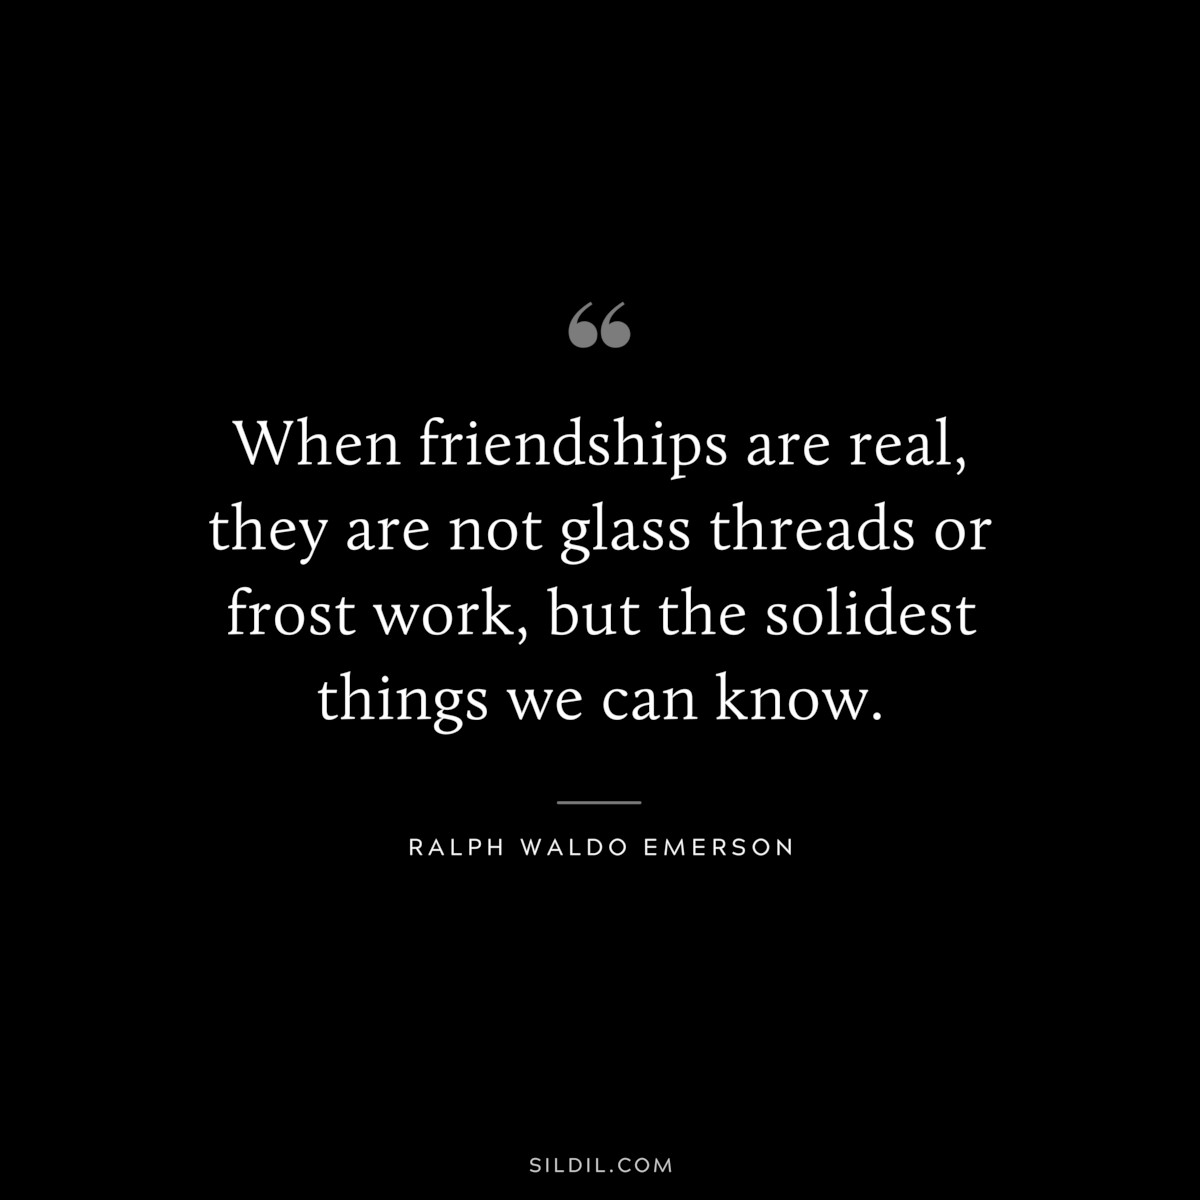 When friendships are real, they are not glass threads or frost work, but the solidest things we can know. — Ralph Waldo Emerson